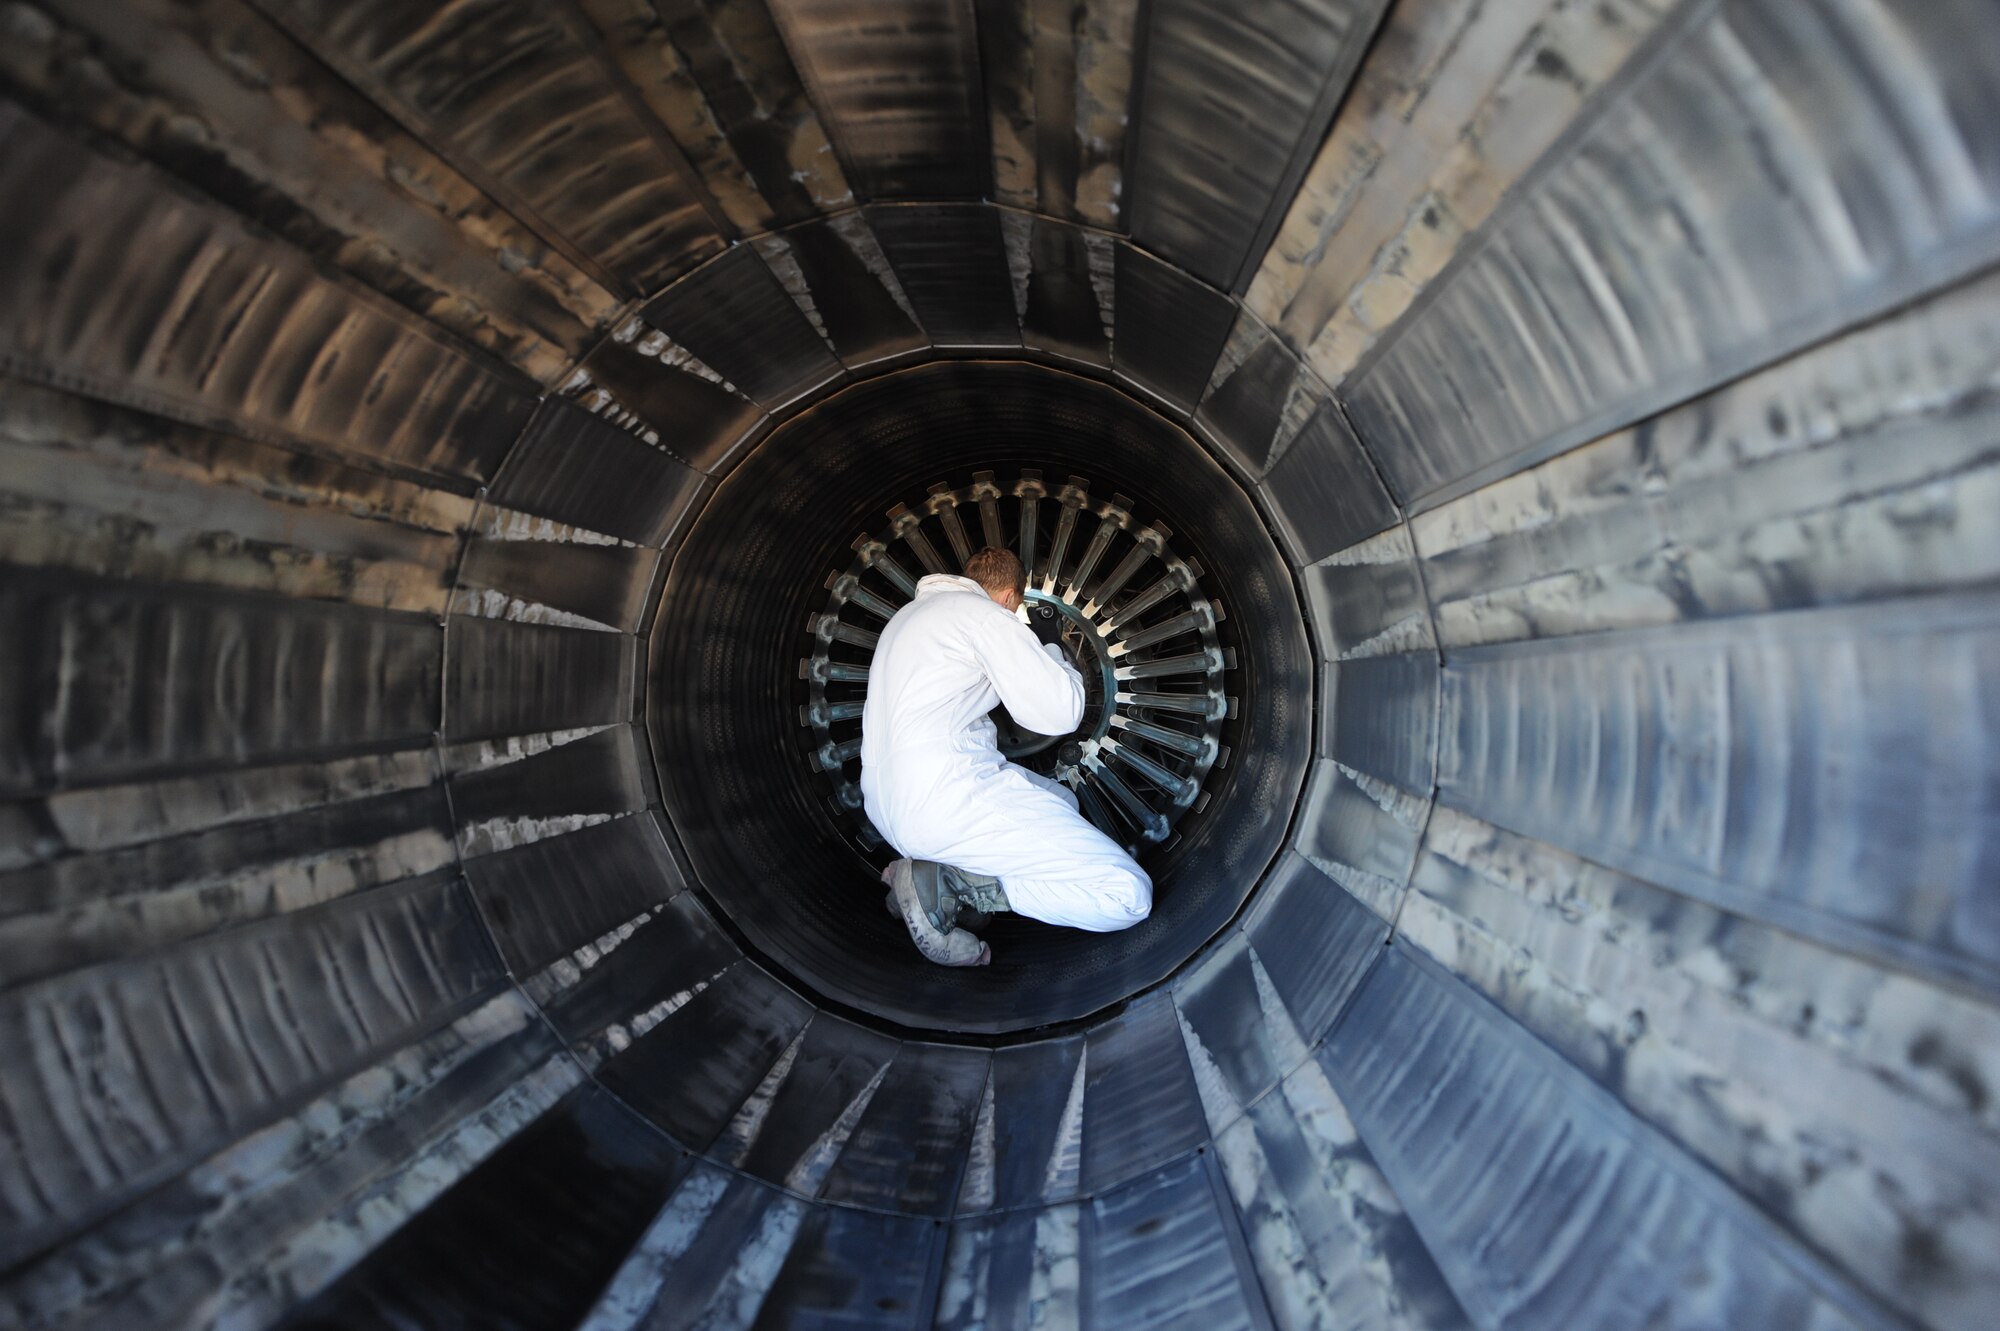 U.S. Air Force Staff Sgt. Ryan Blanton, 7th Aircraft Maintenance Squadron, thoroughly inspects turbine blades inside a B-1 engine Nov. 17, 2013, at Dyess Air Force Base, Texas. The white coveralls worn while inspecting the engine keep maintainers from dropping tools or parts in the inlets or exhaust.  (U.S. Air Force photo by Airman 1st Class Alexander Guerrero/Released)